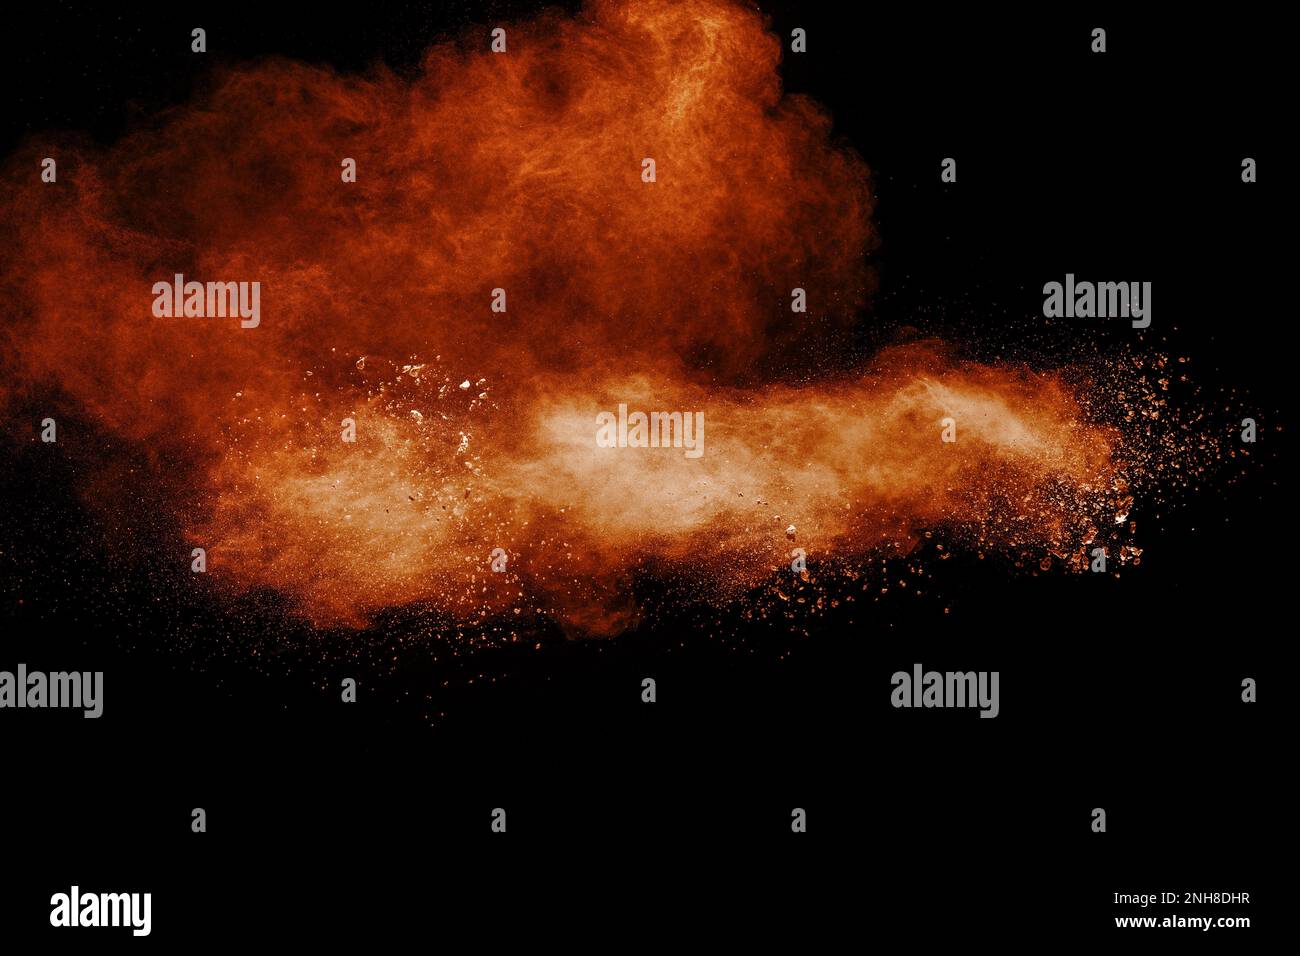 Brown dust explosion cloud.Brown particles splatter on black background. Stock Photo